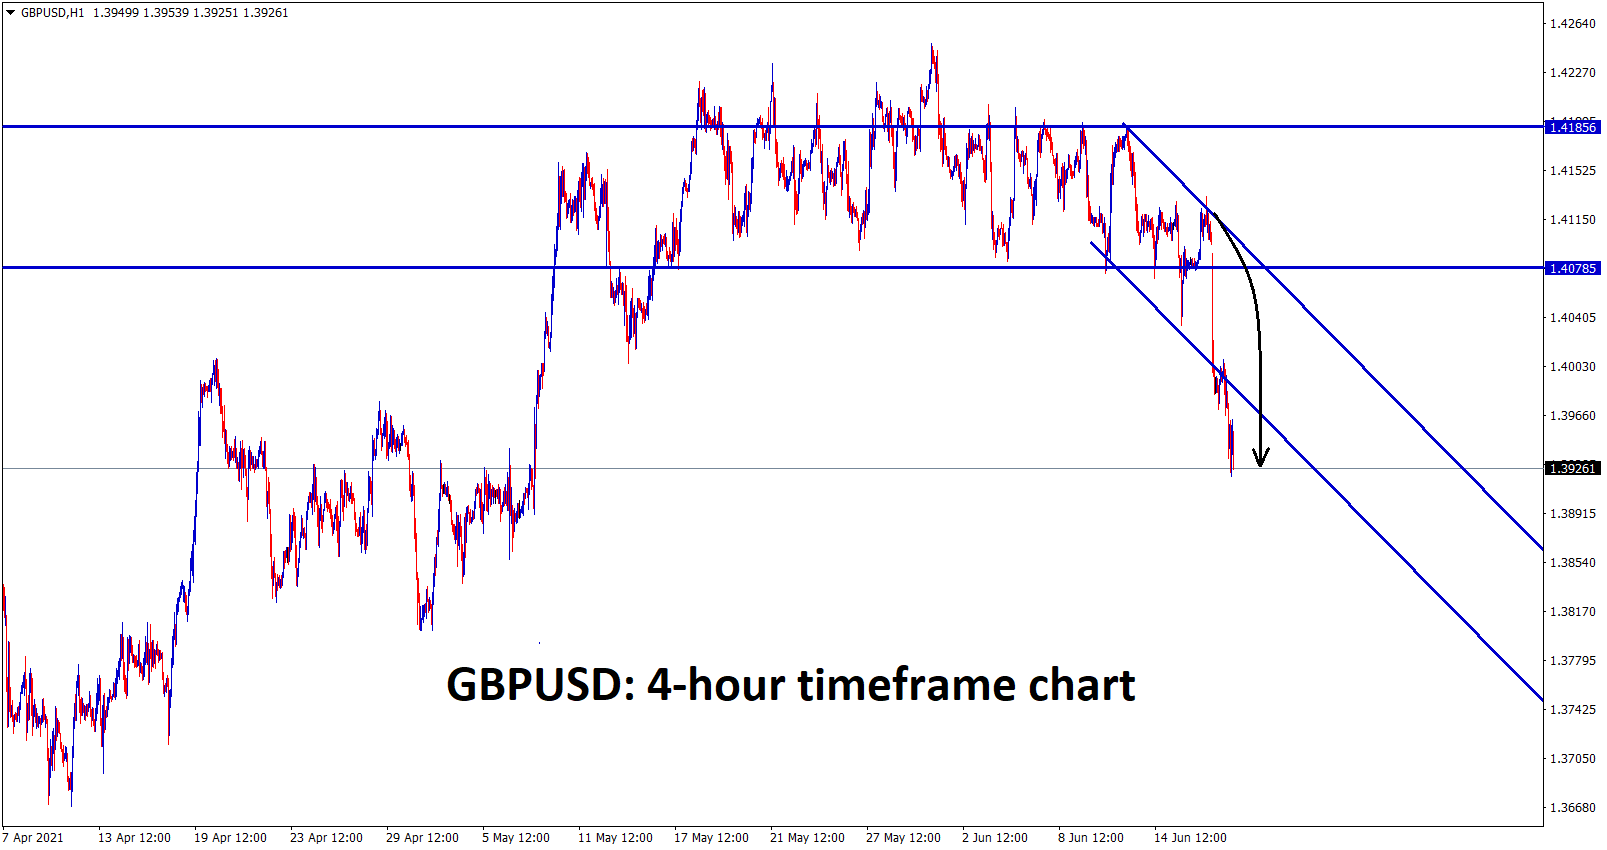 GBPUSD has broken the support area and downtrend line